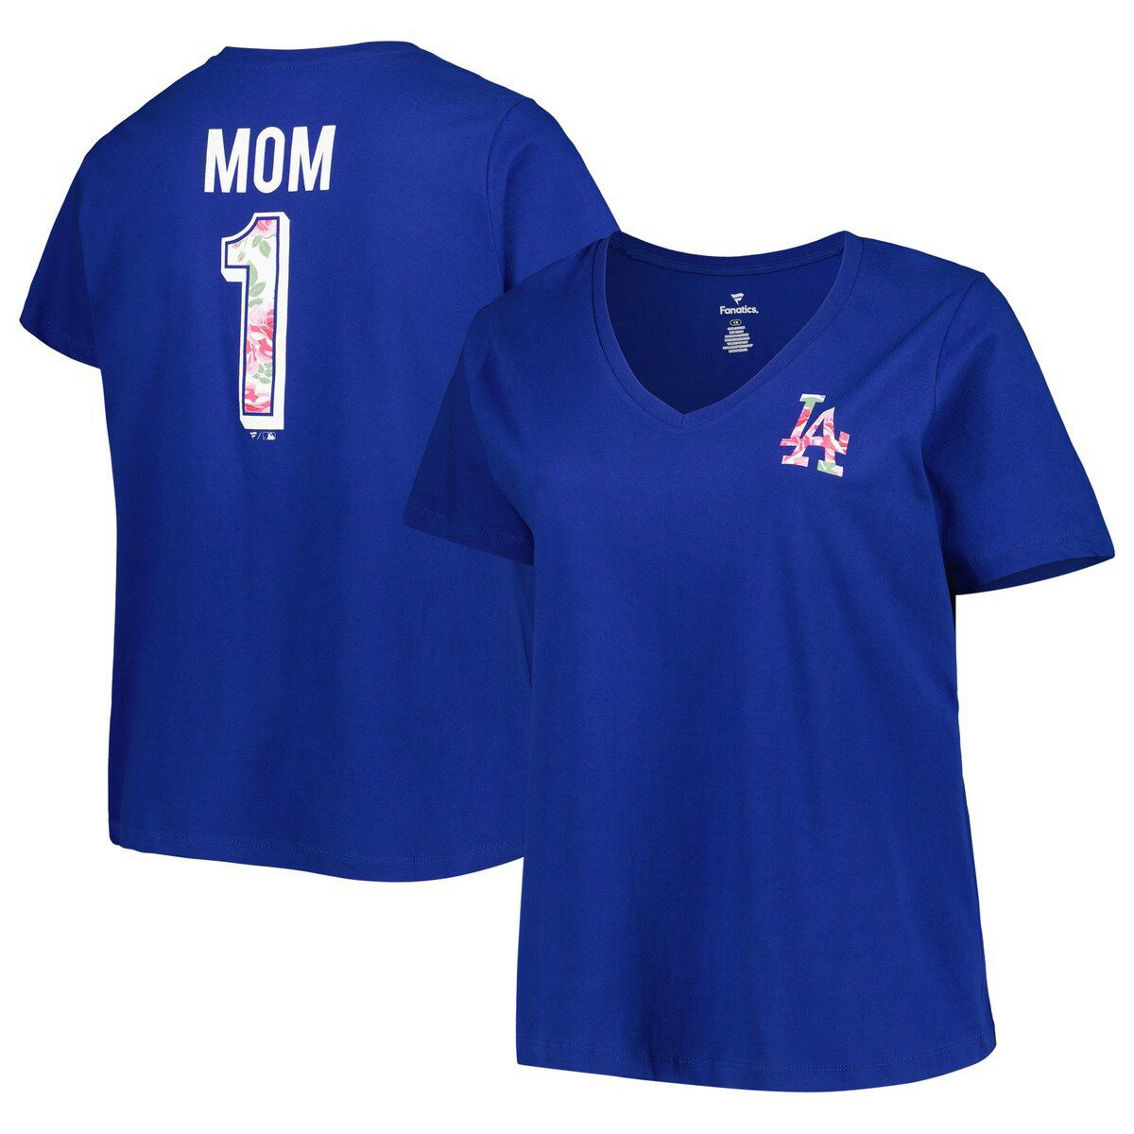 Profile Women's Royal Los Angeles Dodgers Mother's Day Plus Size Best Mom Ever V-Neck T-Shirt - Image 2 of 4